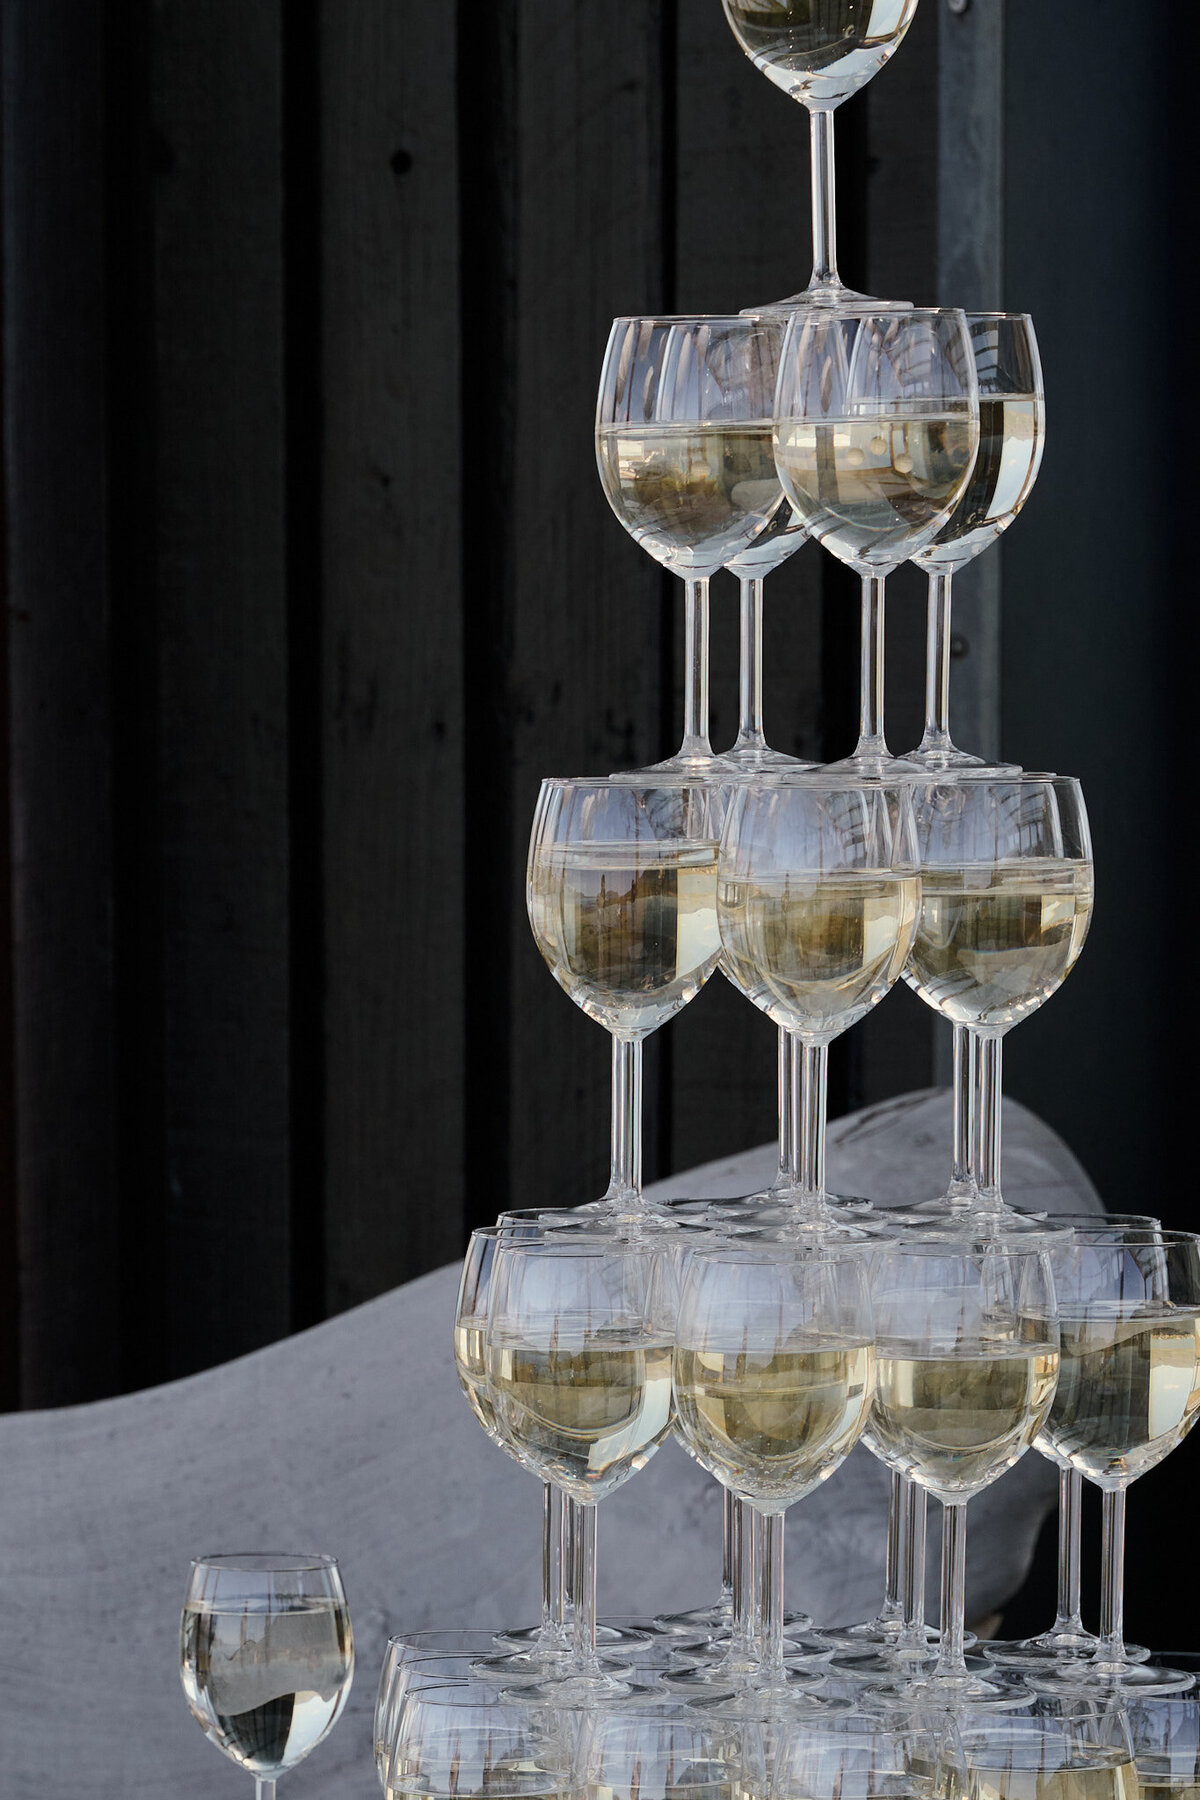 A close shot of a champagne tower in front of a black wall